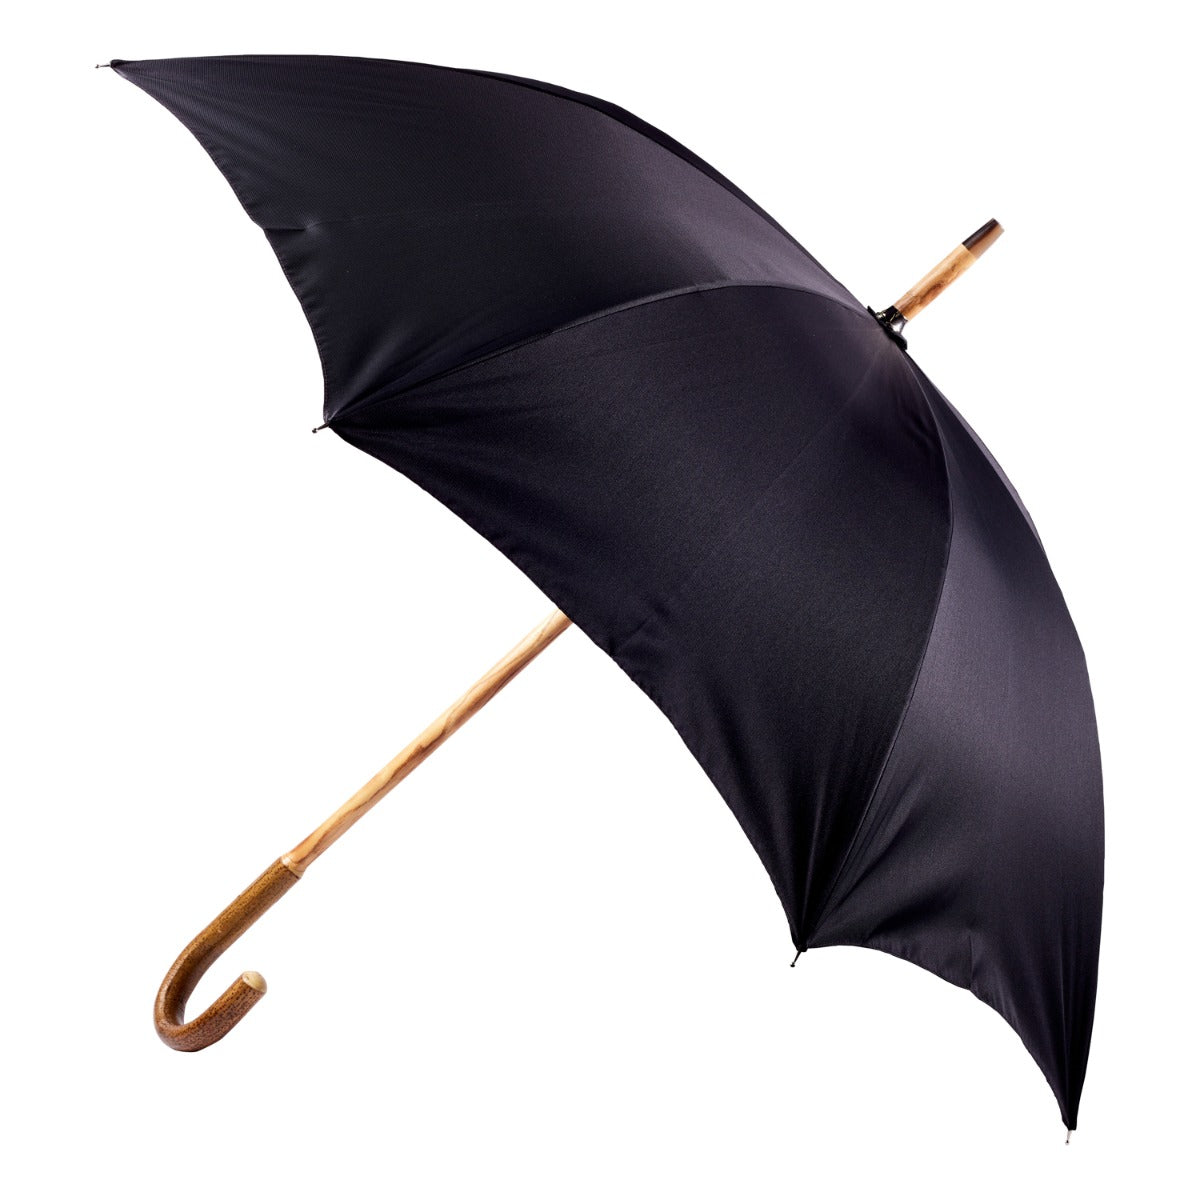 A Palundio Umbrella with Black Twill Canopy from KirbyAllison.com, handmade with a wooden handle on a white background.